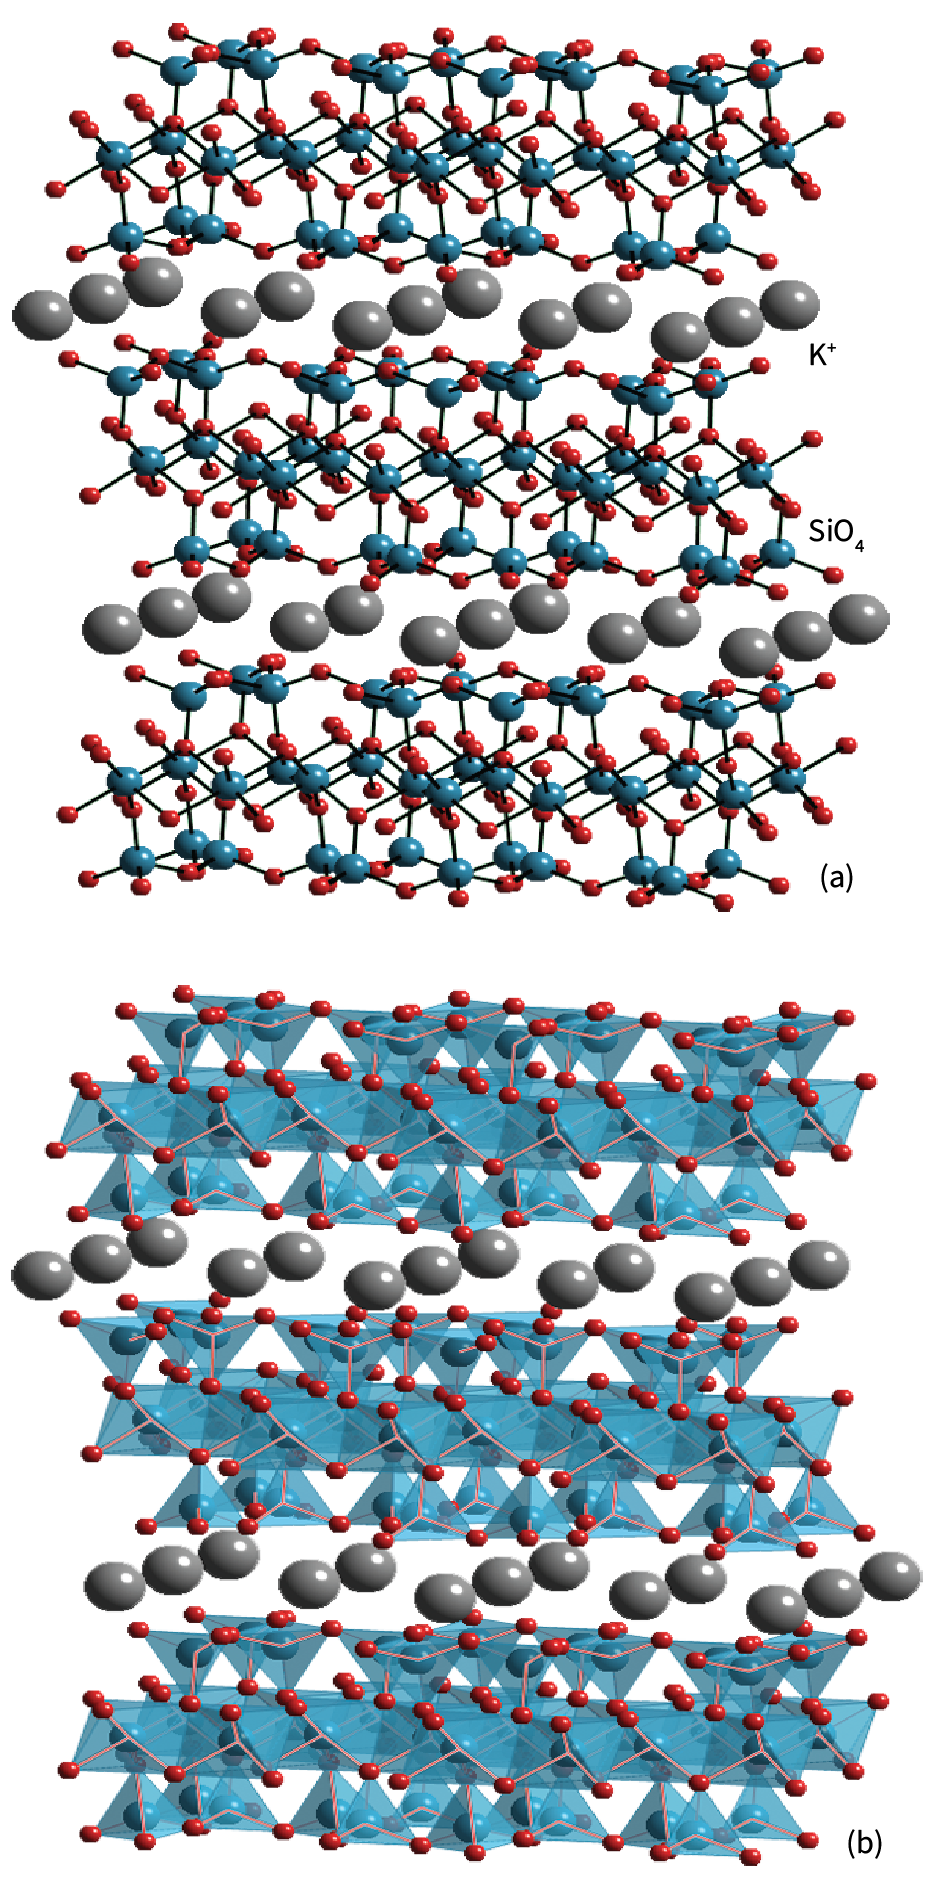 The structure of 2:1 clay minerals such as muscovite mica KAl2(OH)2Si3AlO10